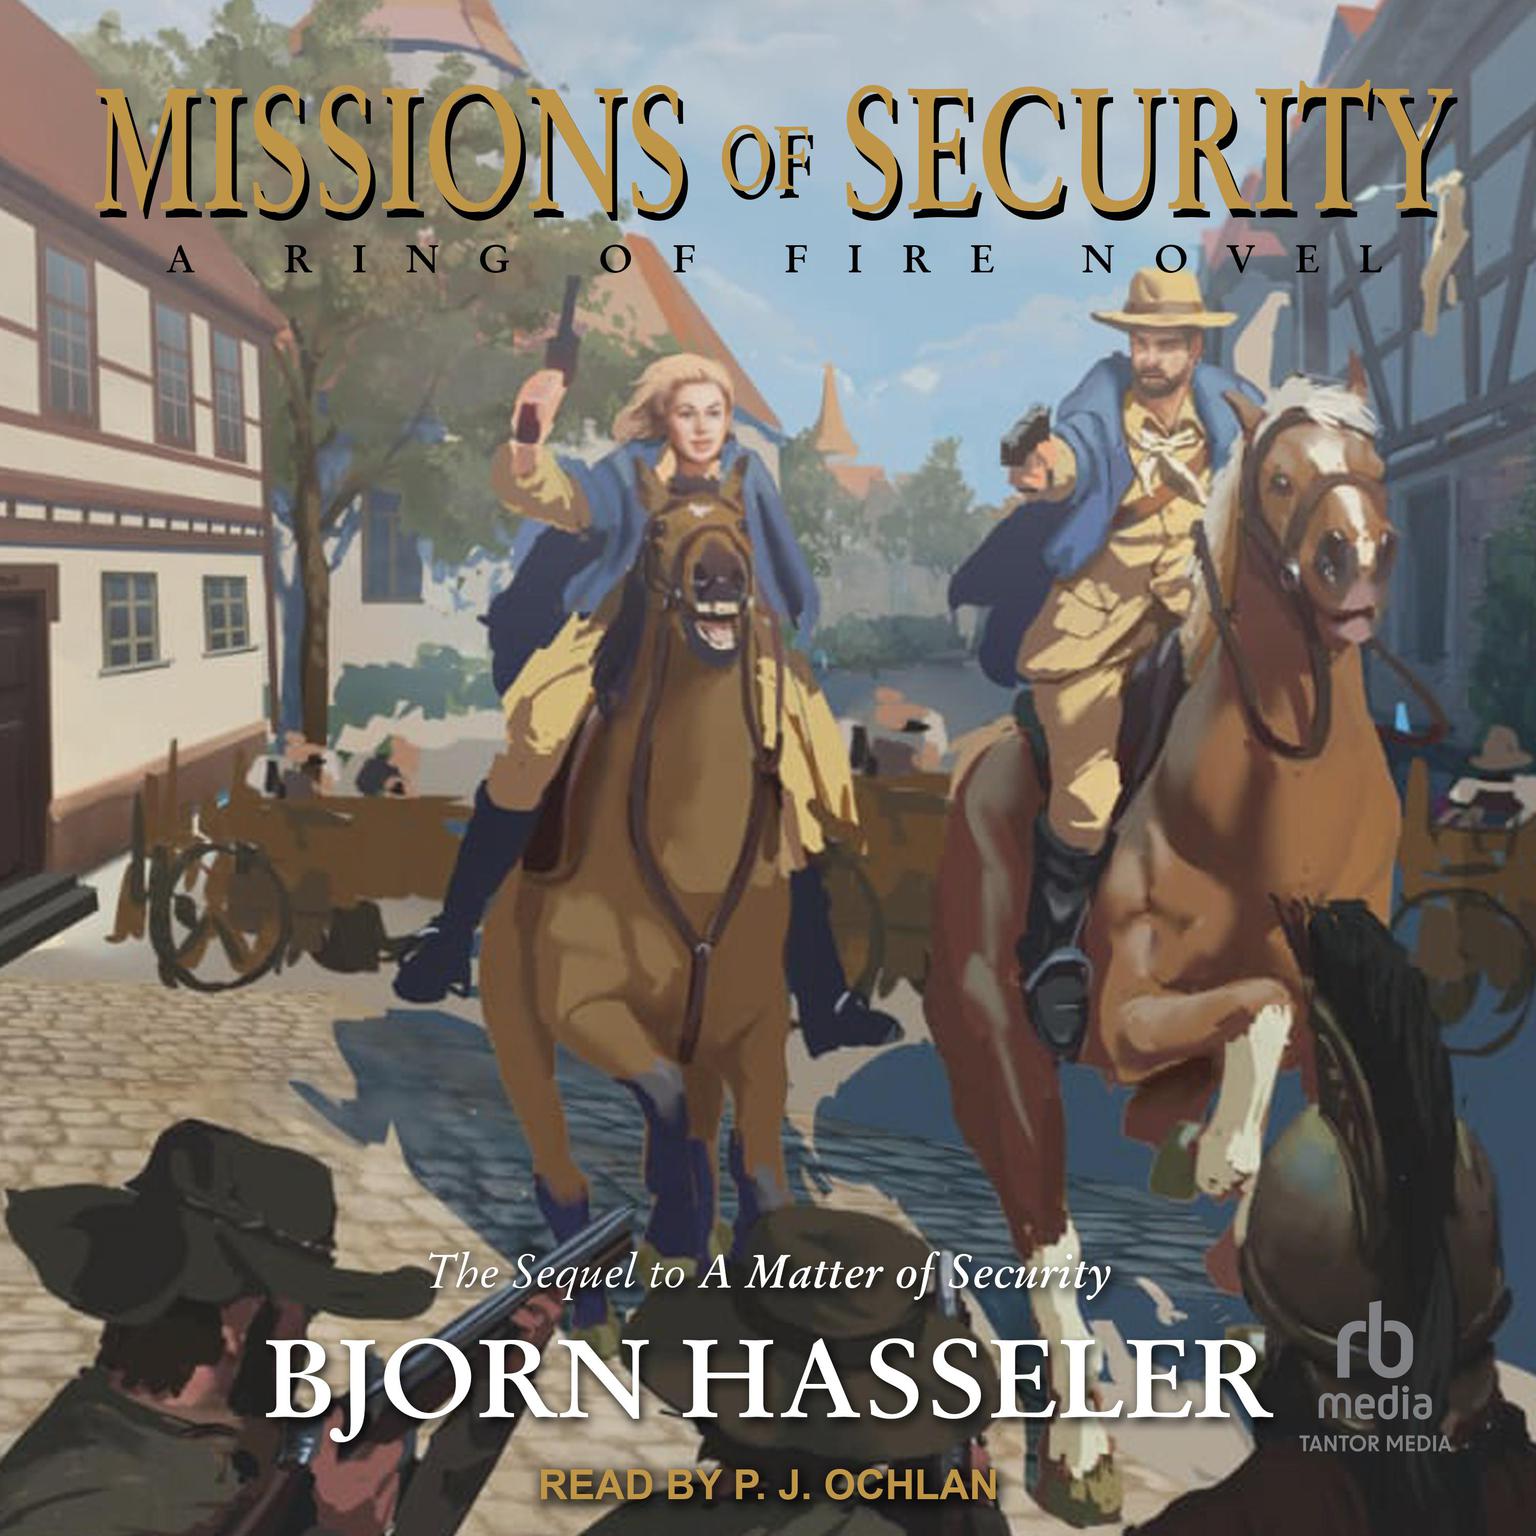 Missions of Security: A Ring of Fire Novel Audiobook, by Bjorn Hasseler